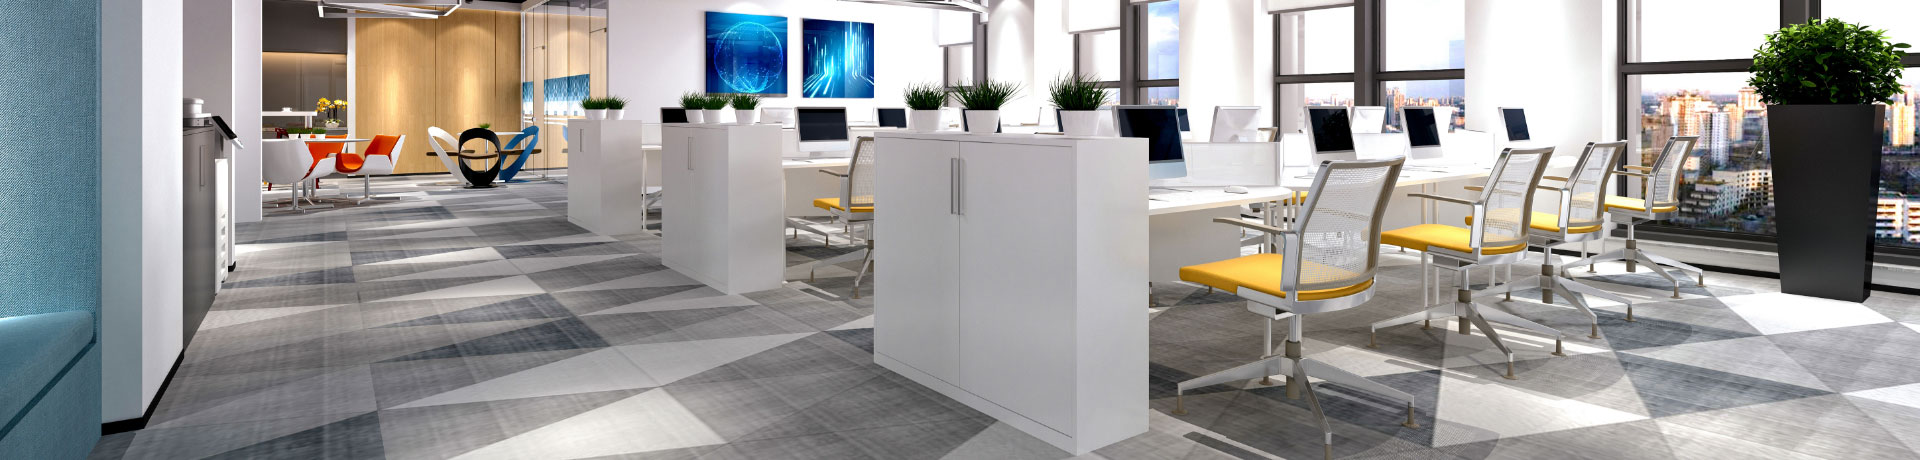 Spotless open office area that has been cleaned by ServiceMaster Clean janitorial cleaning services